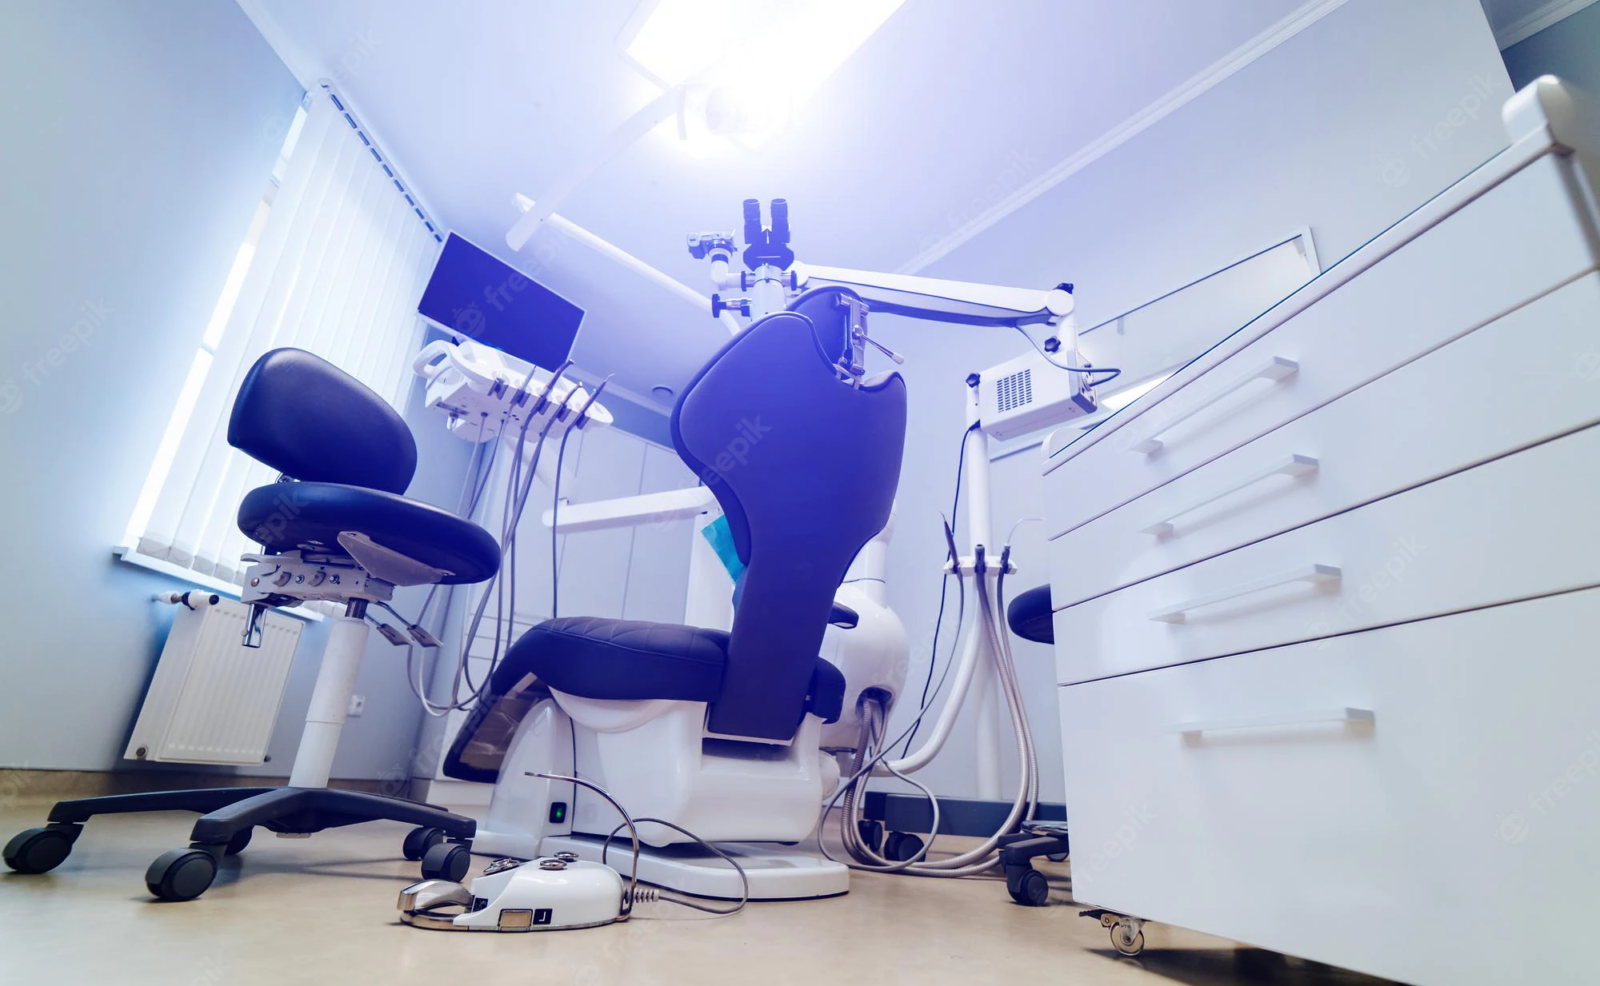 Modern dental patient rig including chair, lights, microscope, and computer